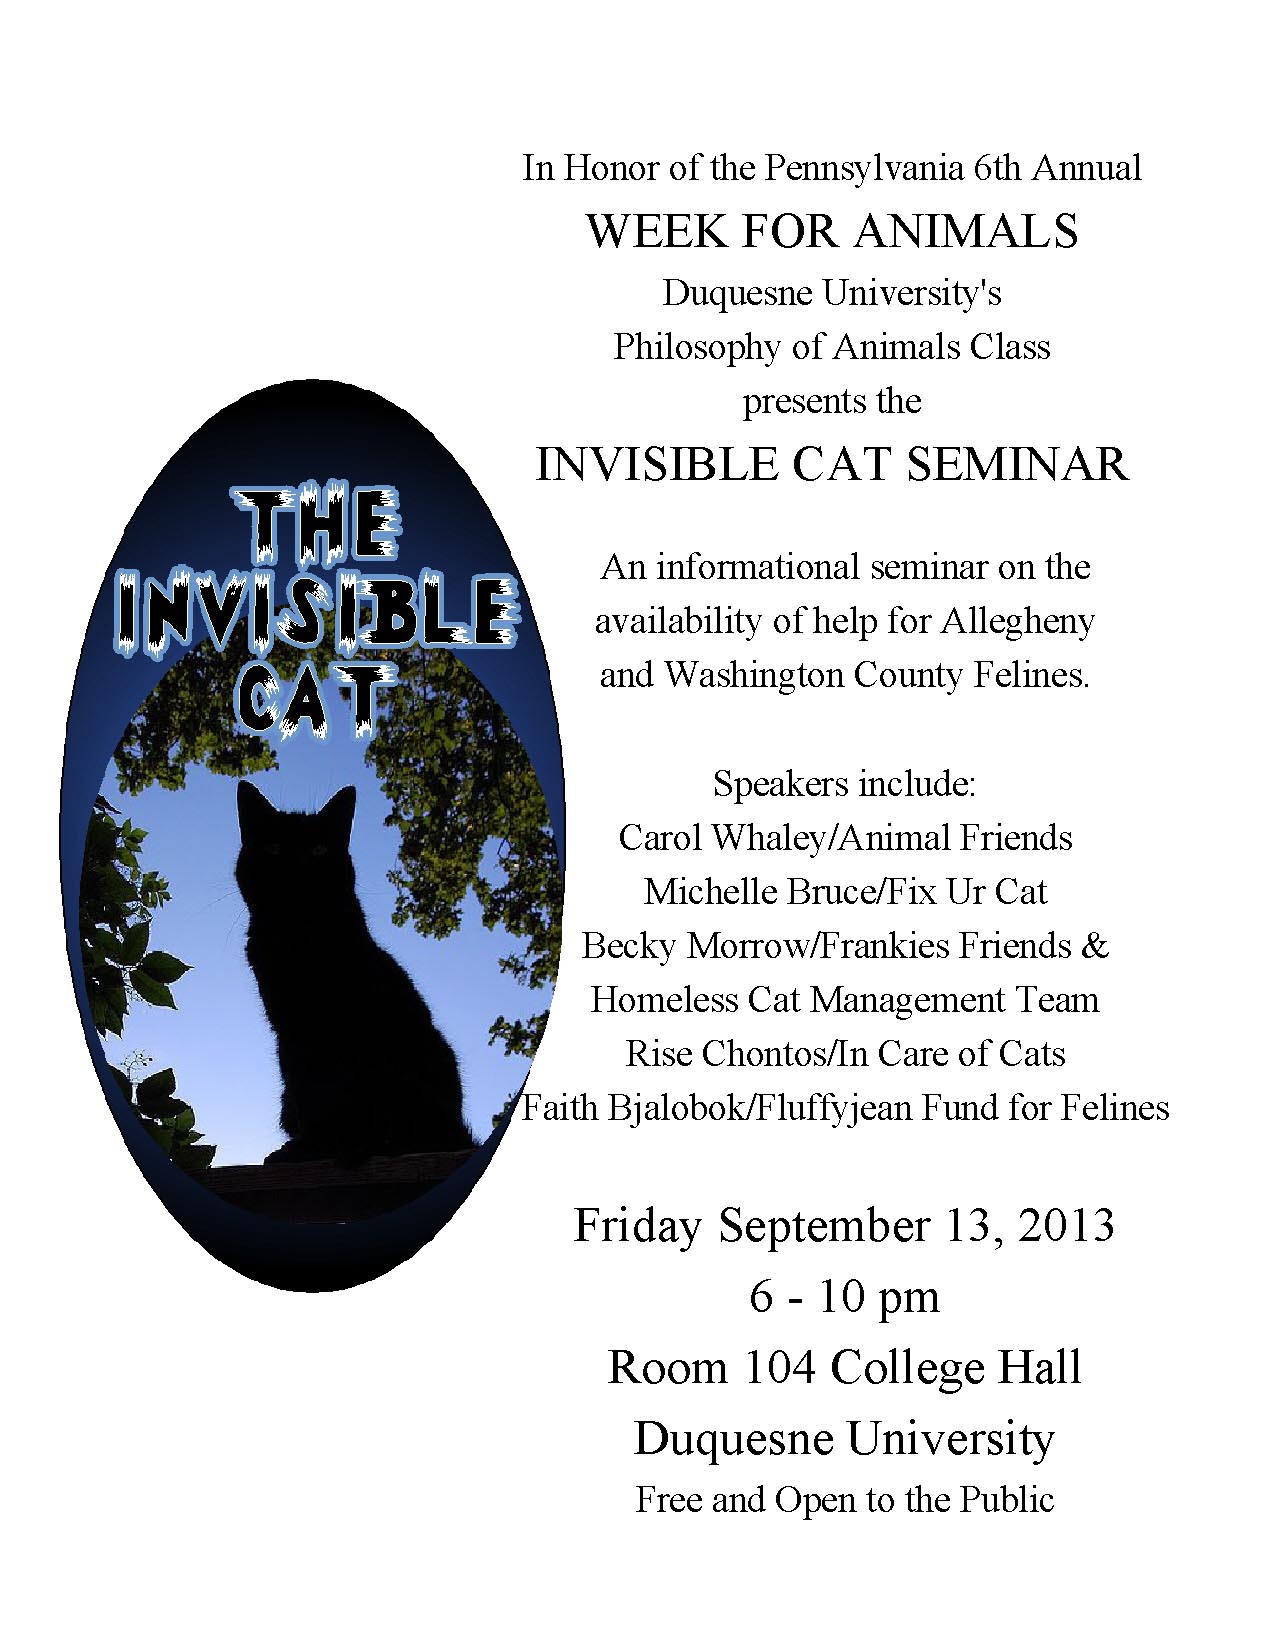 the invisible cat seminar pittsburgh